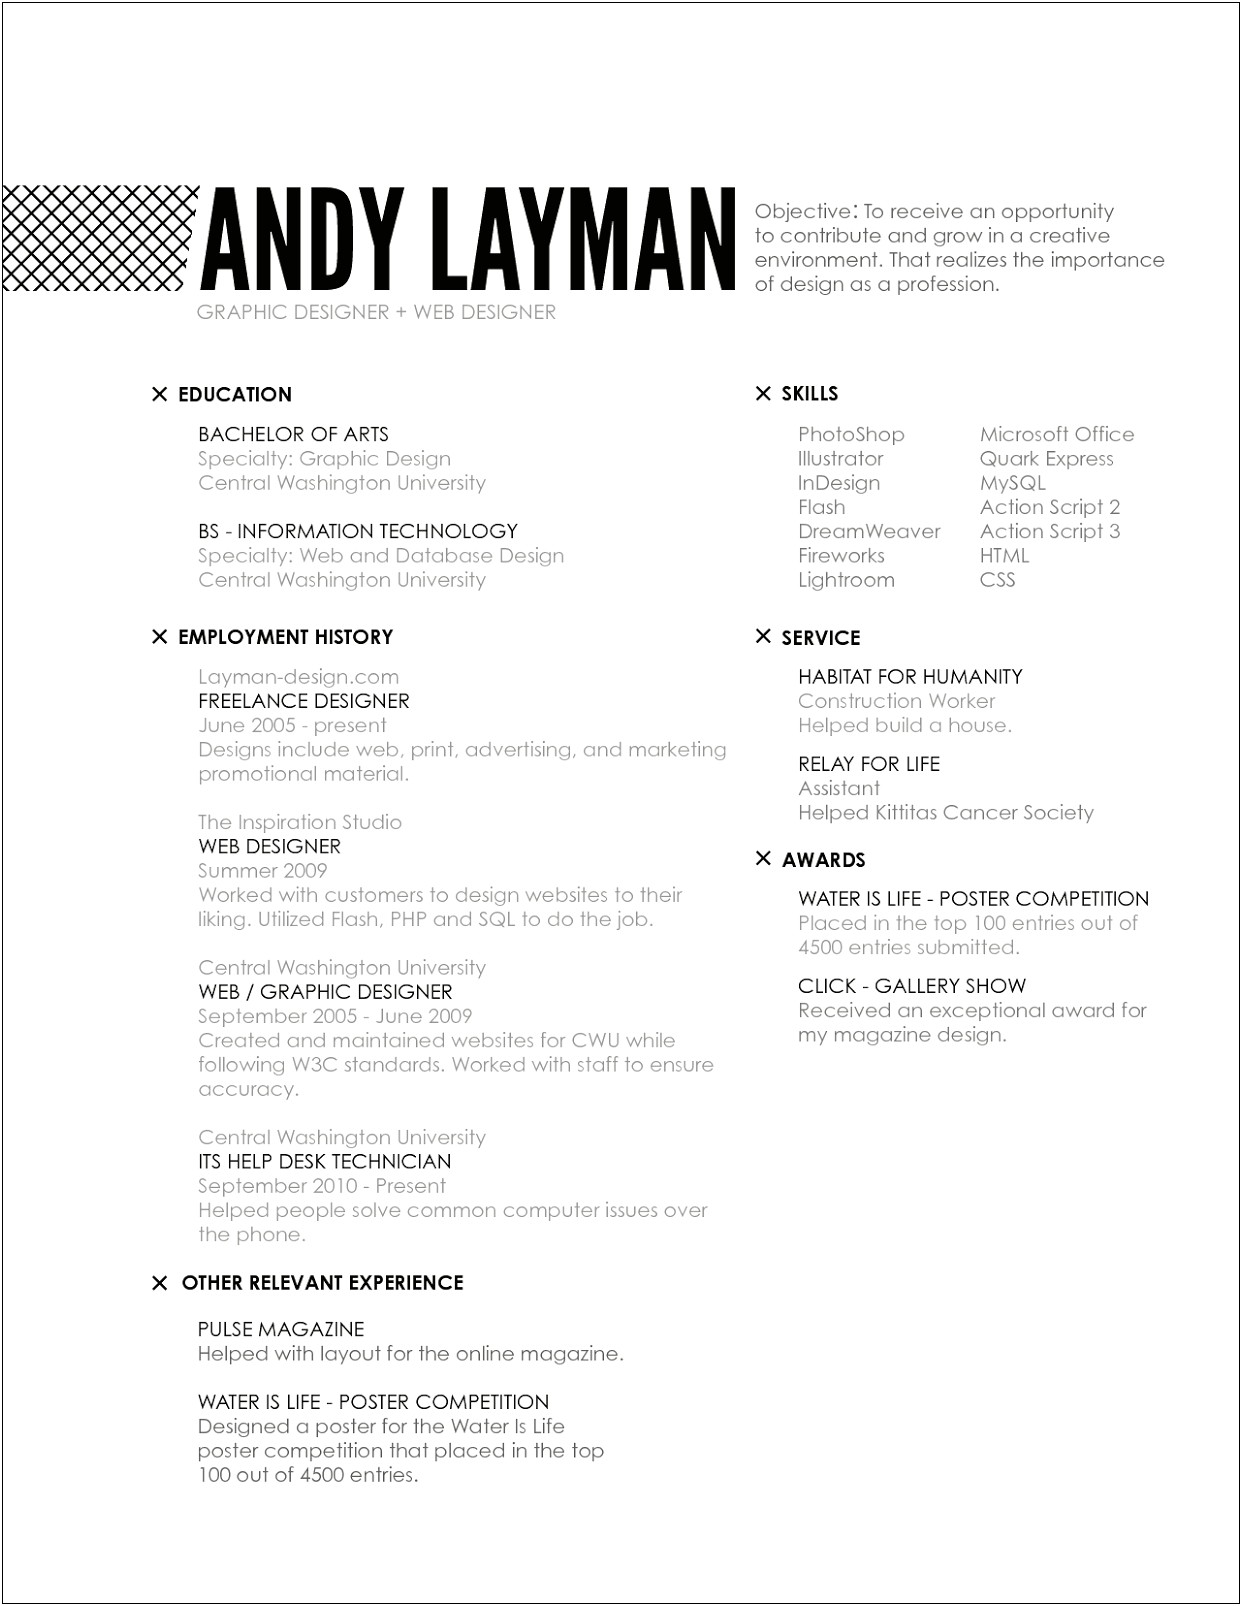 Synonyms For Manage On Resume